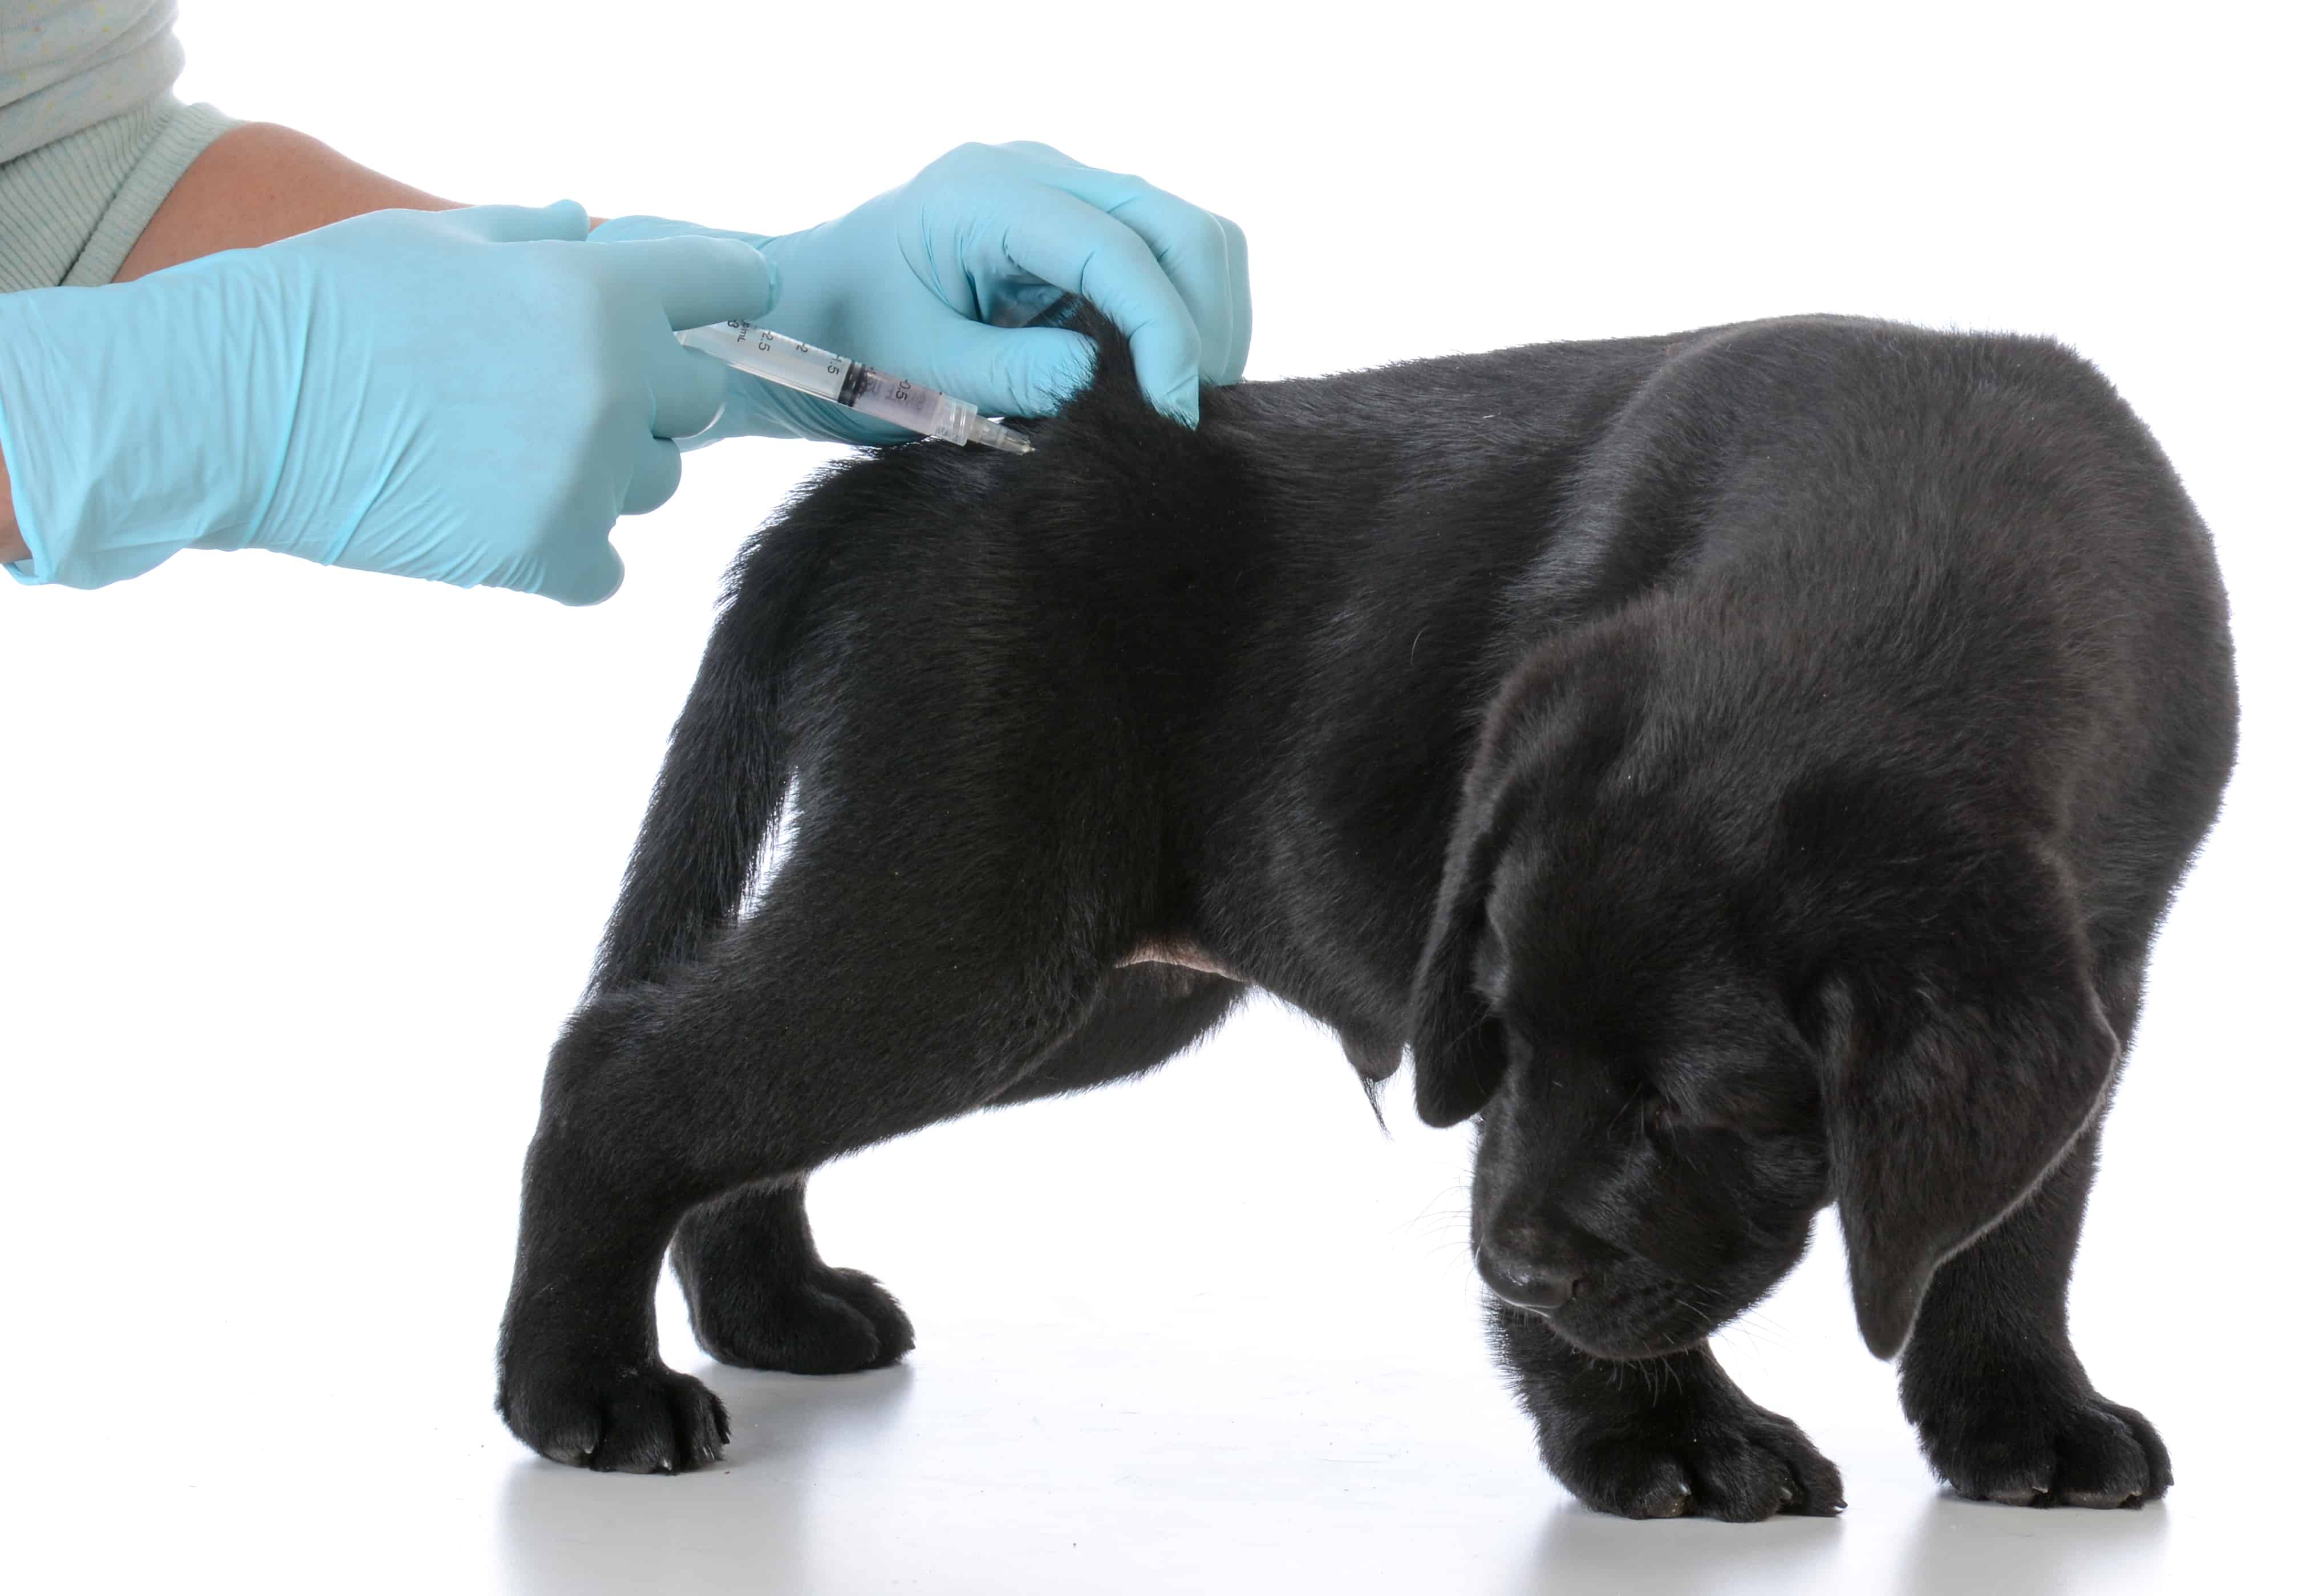 puppy getting vaccinated